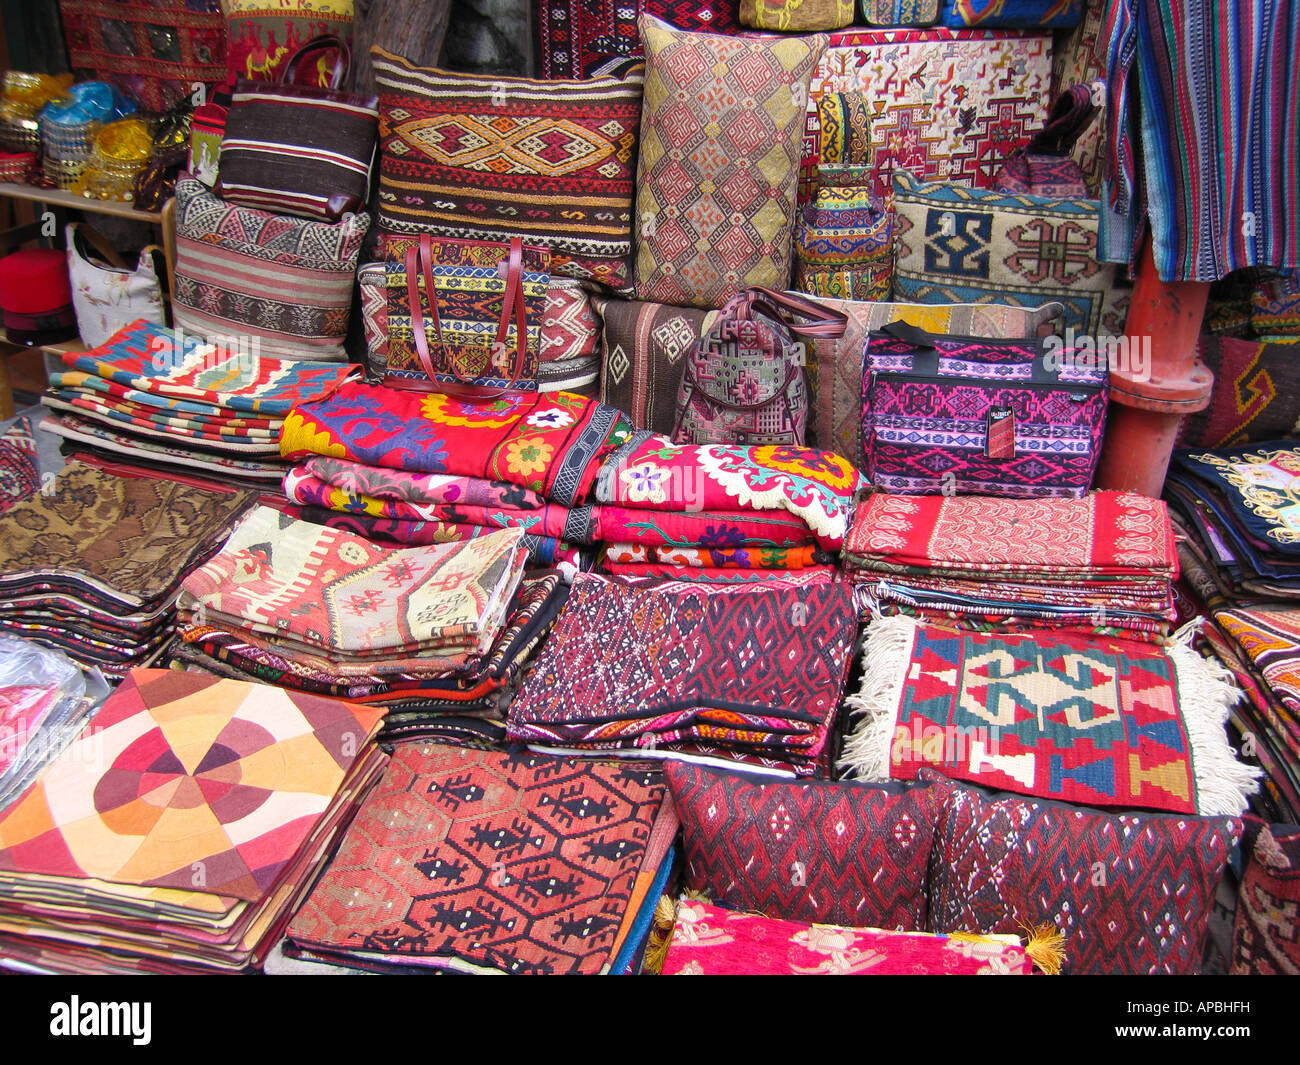 Piles of mats and cushions, bags on a market stall selling traditional Turkish patterned fabrics Stock Photo